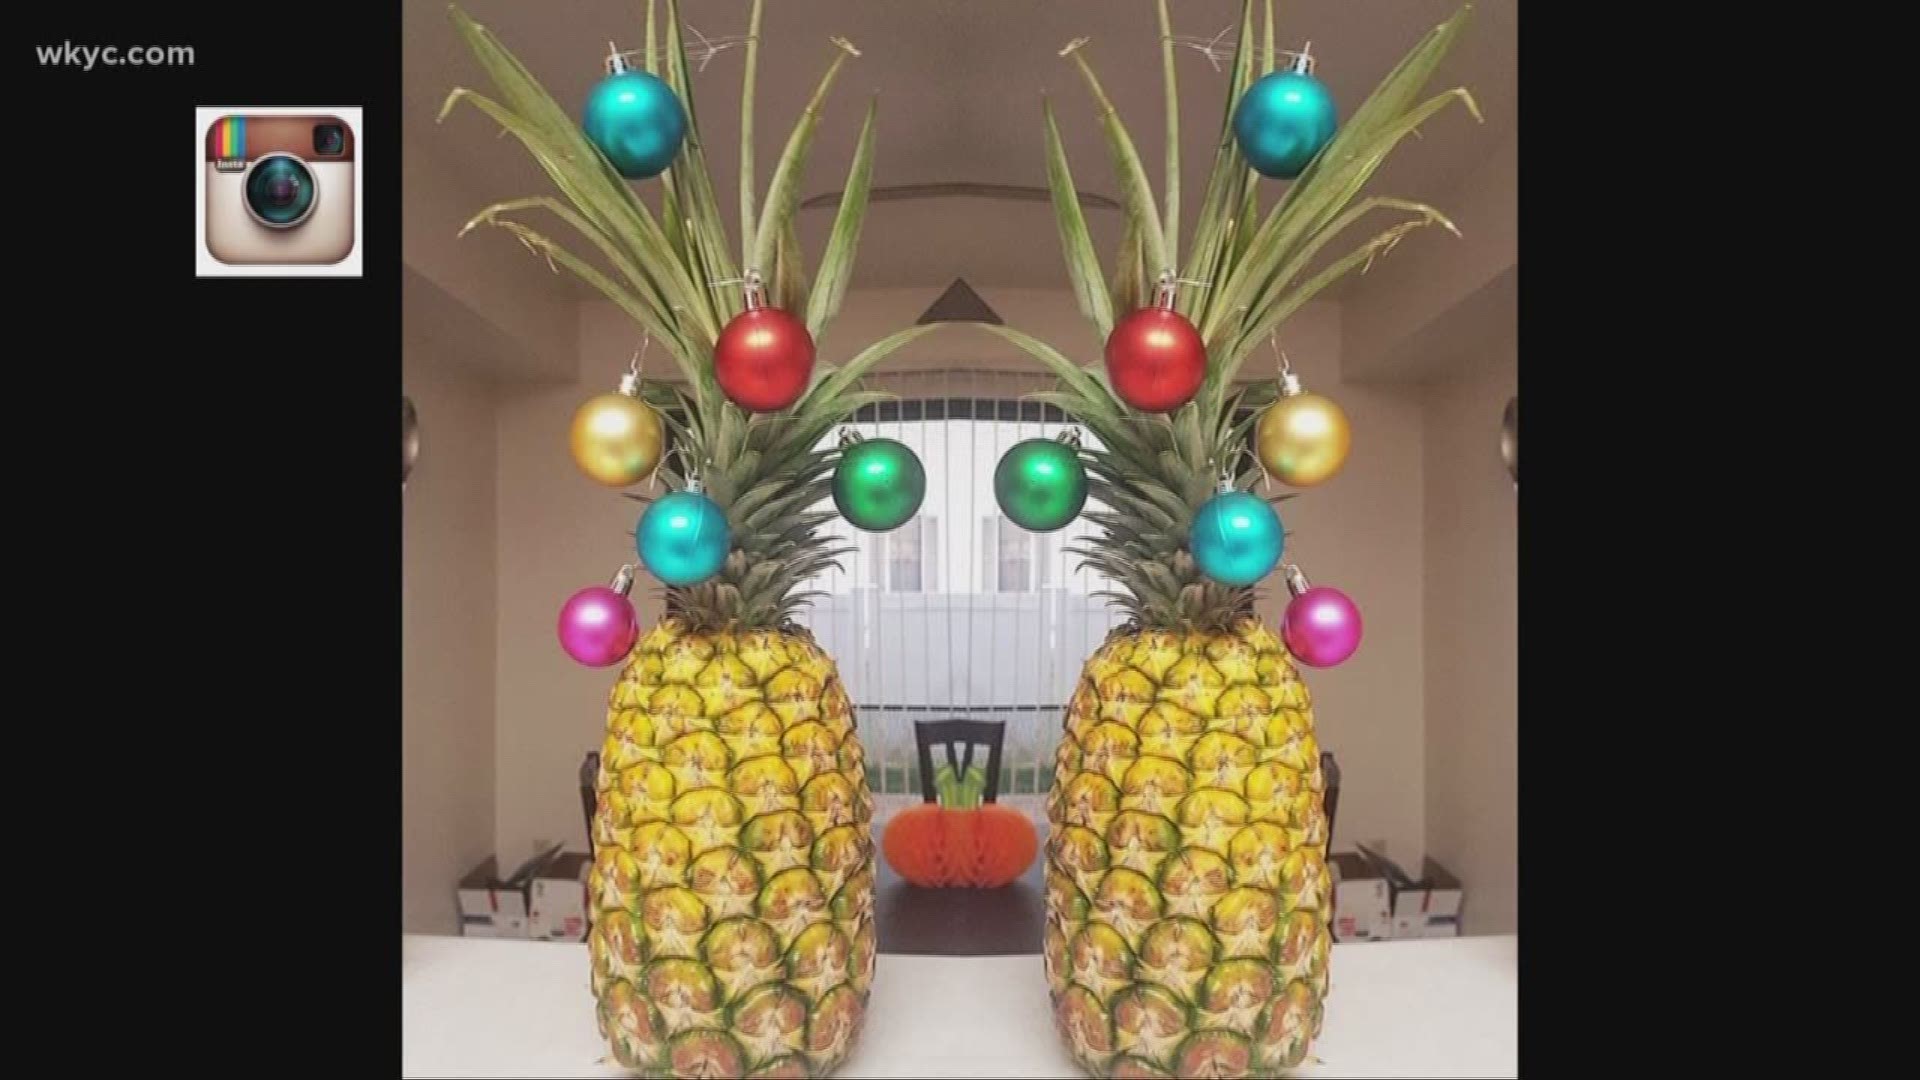 The Pineapple Christmas Tree, a new favorite holiday tradition